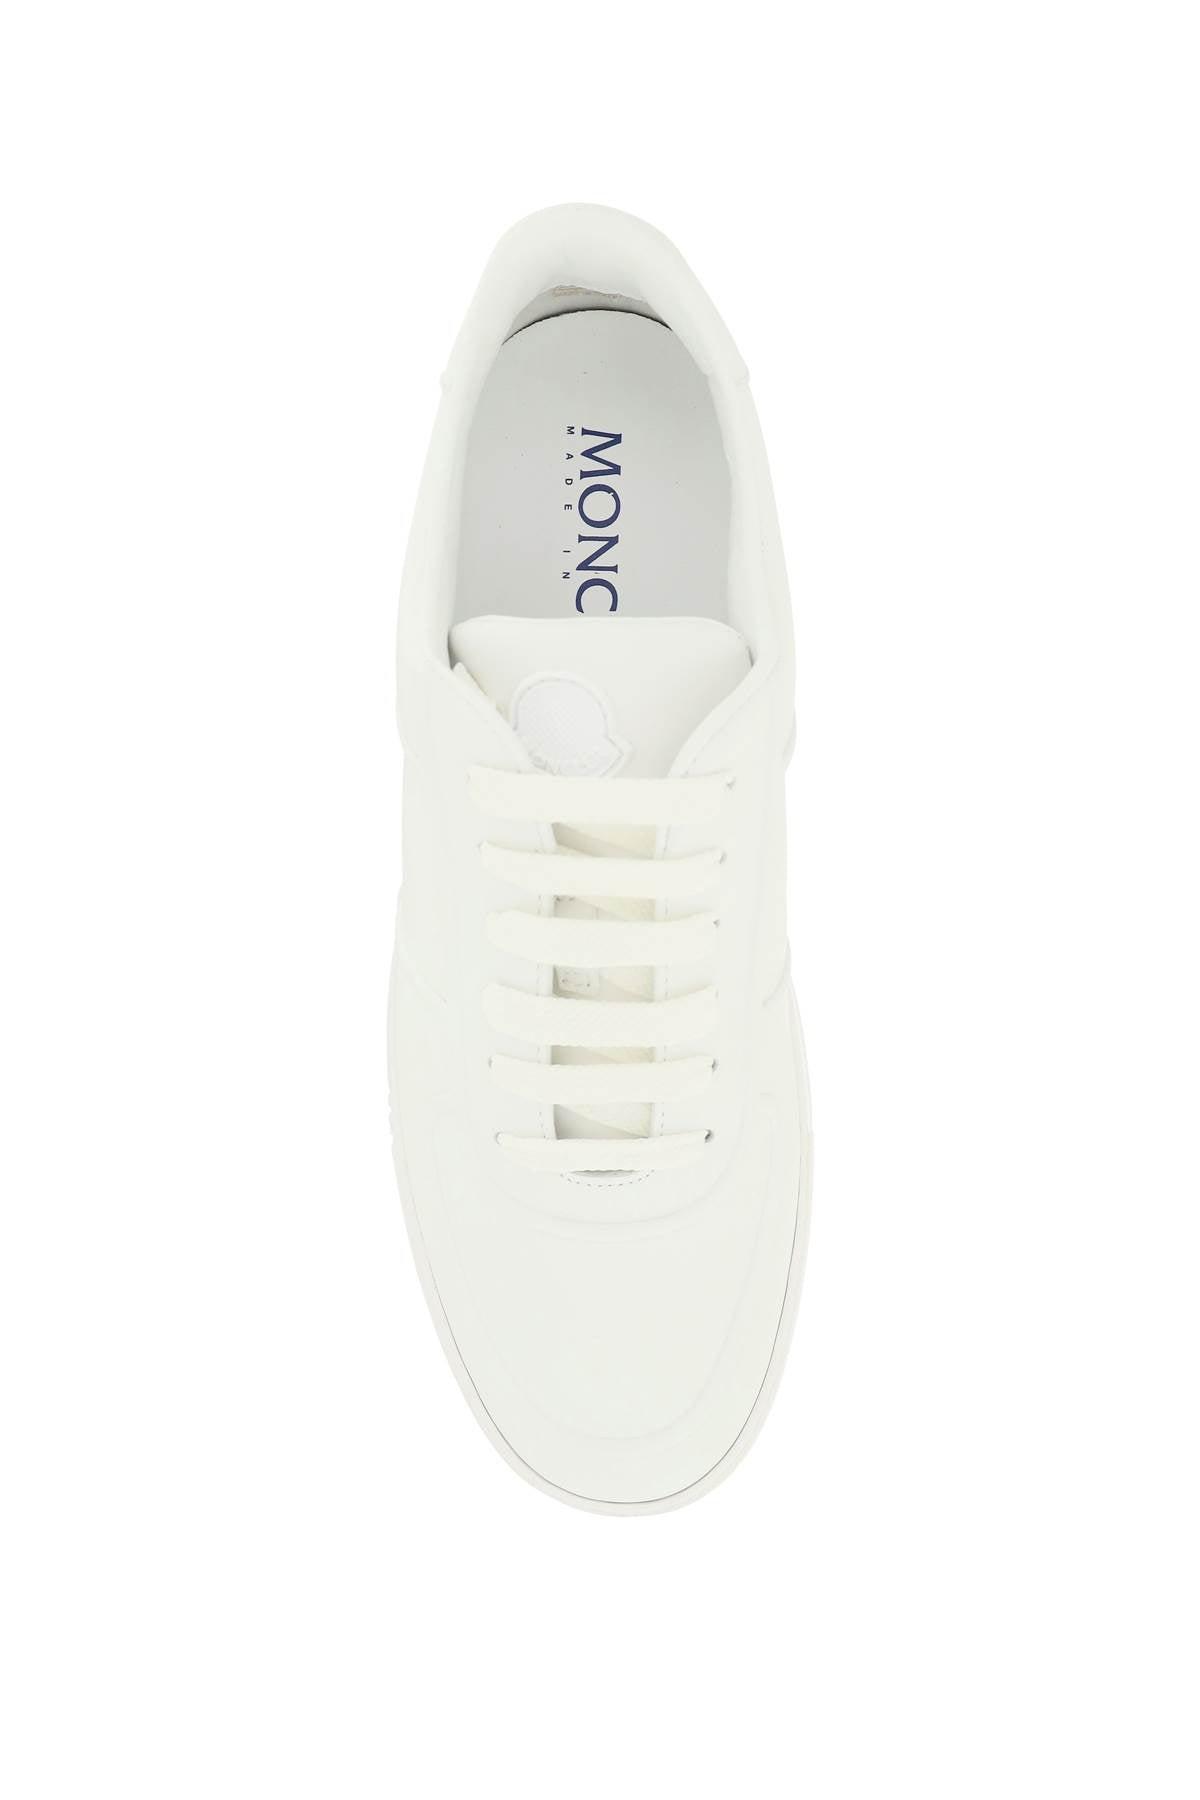 Moncler 'neue York' Leather Sneakers in White for Men | Lyst